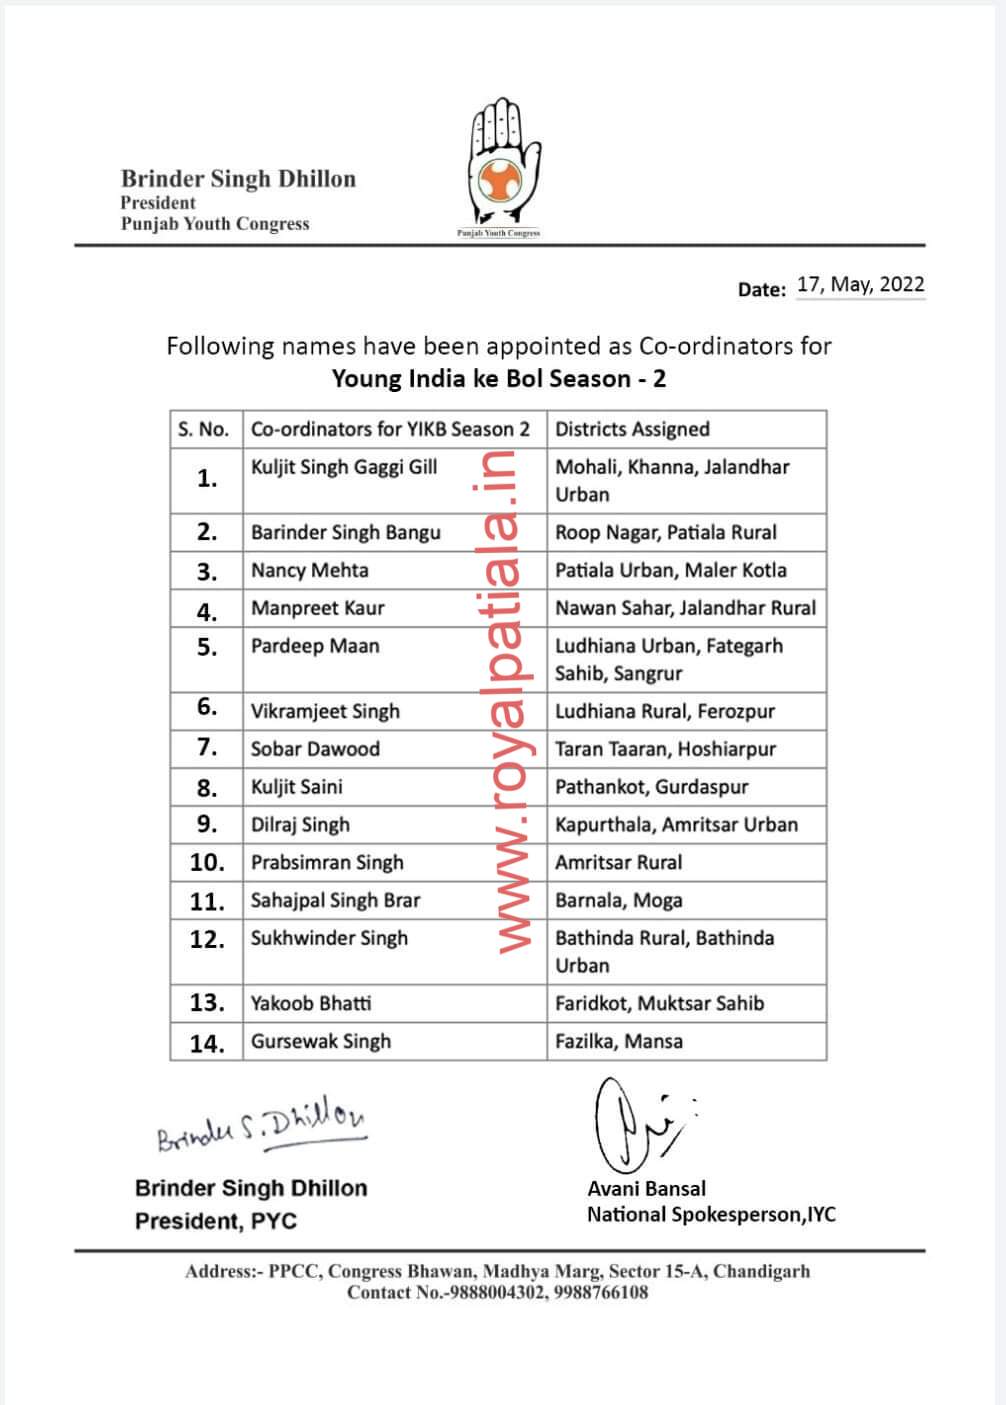 “Young India Ka Bol Session-2” Co-ordinators list released by PYC president Dhillon